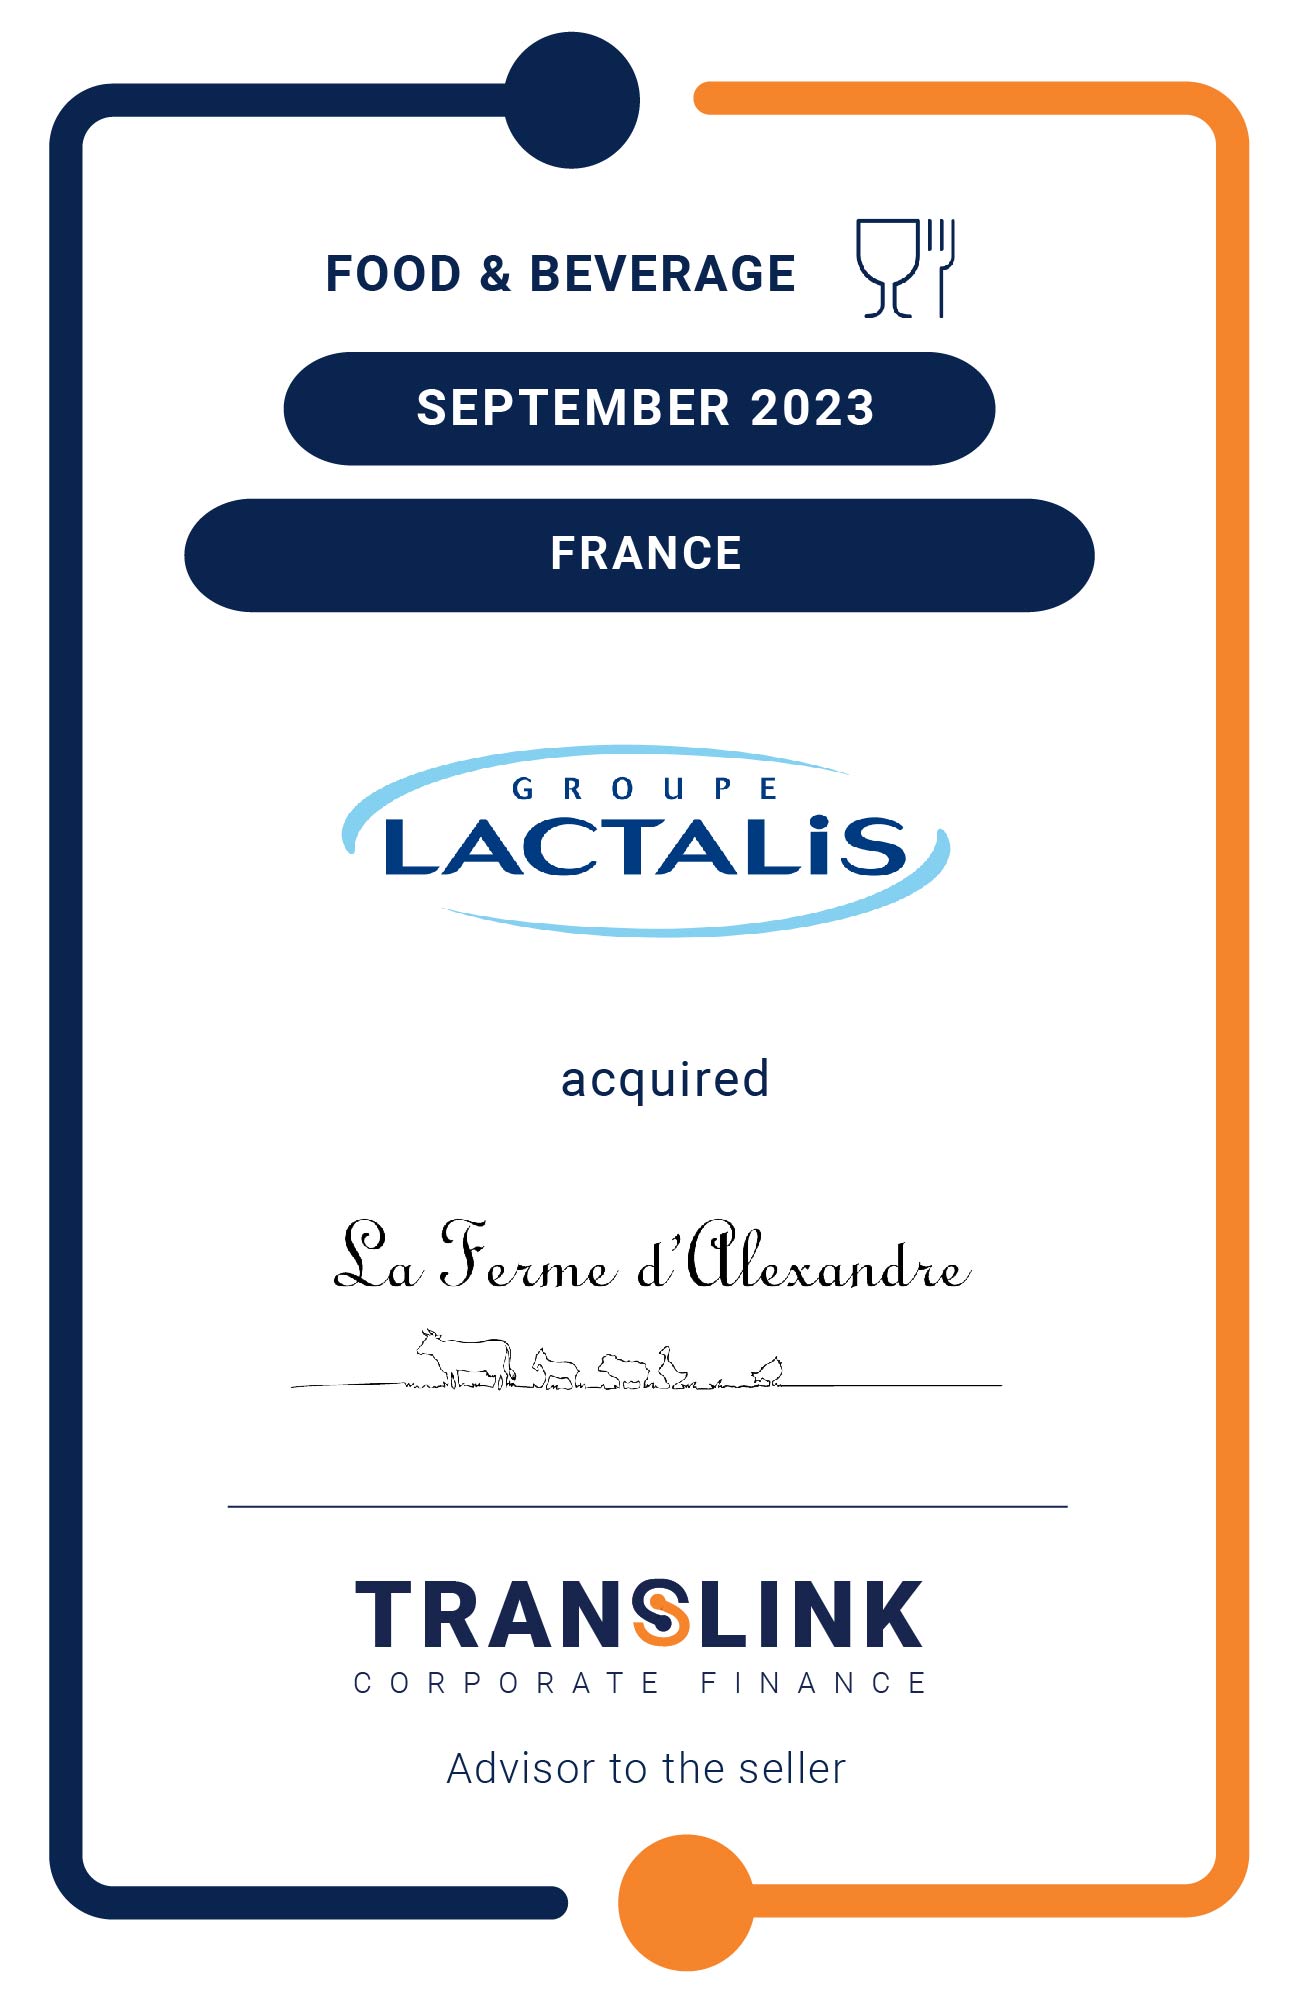 Translink Corporate Finance acted as the exclusive advisor to La Ferme d’Alexandre on the sale to Lactalis Group